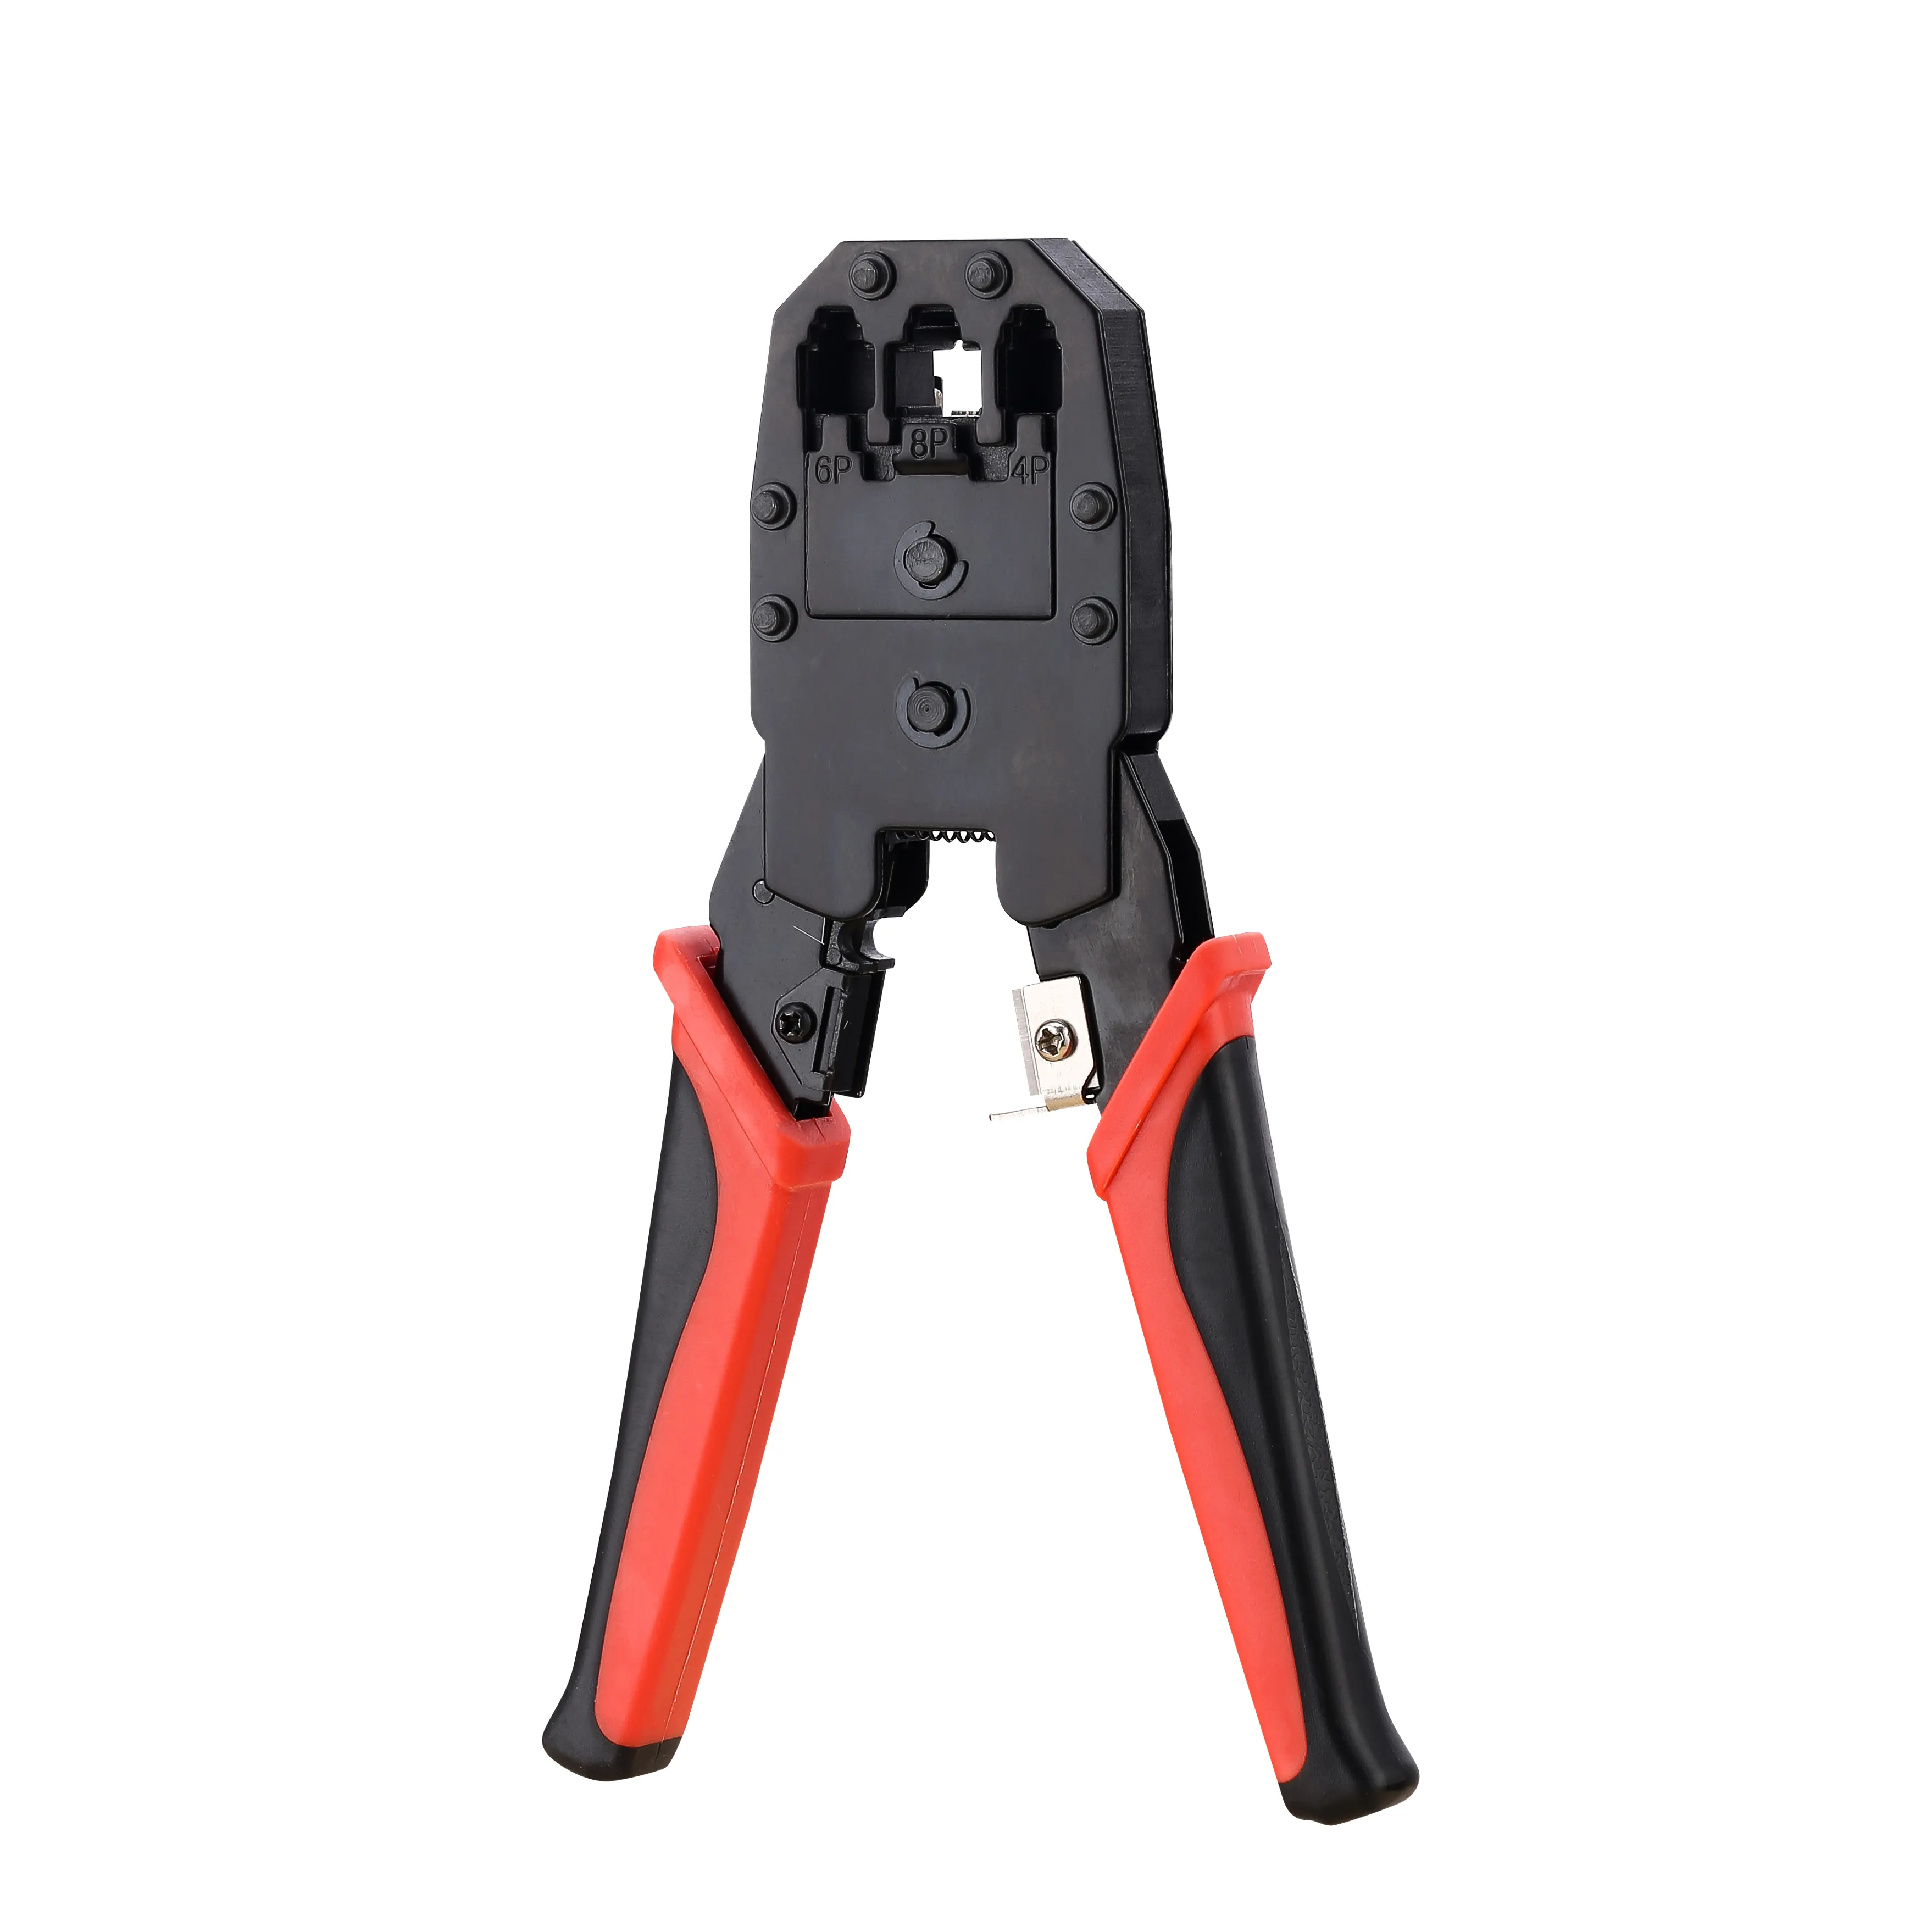 JUMLEE Factory In China Produces Cable Crimping Tools Multifunctional Network Crimping Tools Crimping Pliers 3 In 1